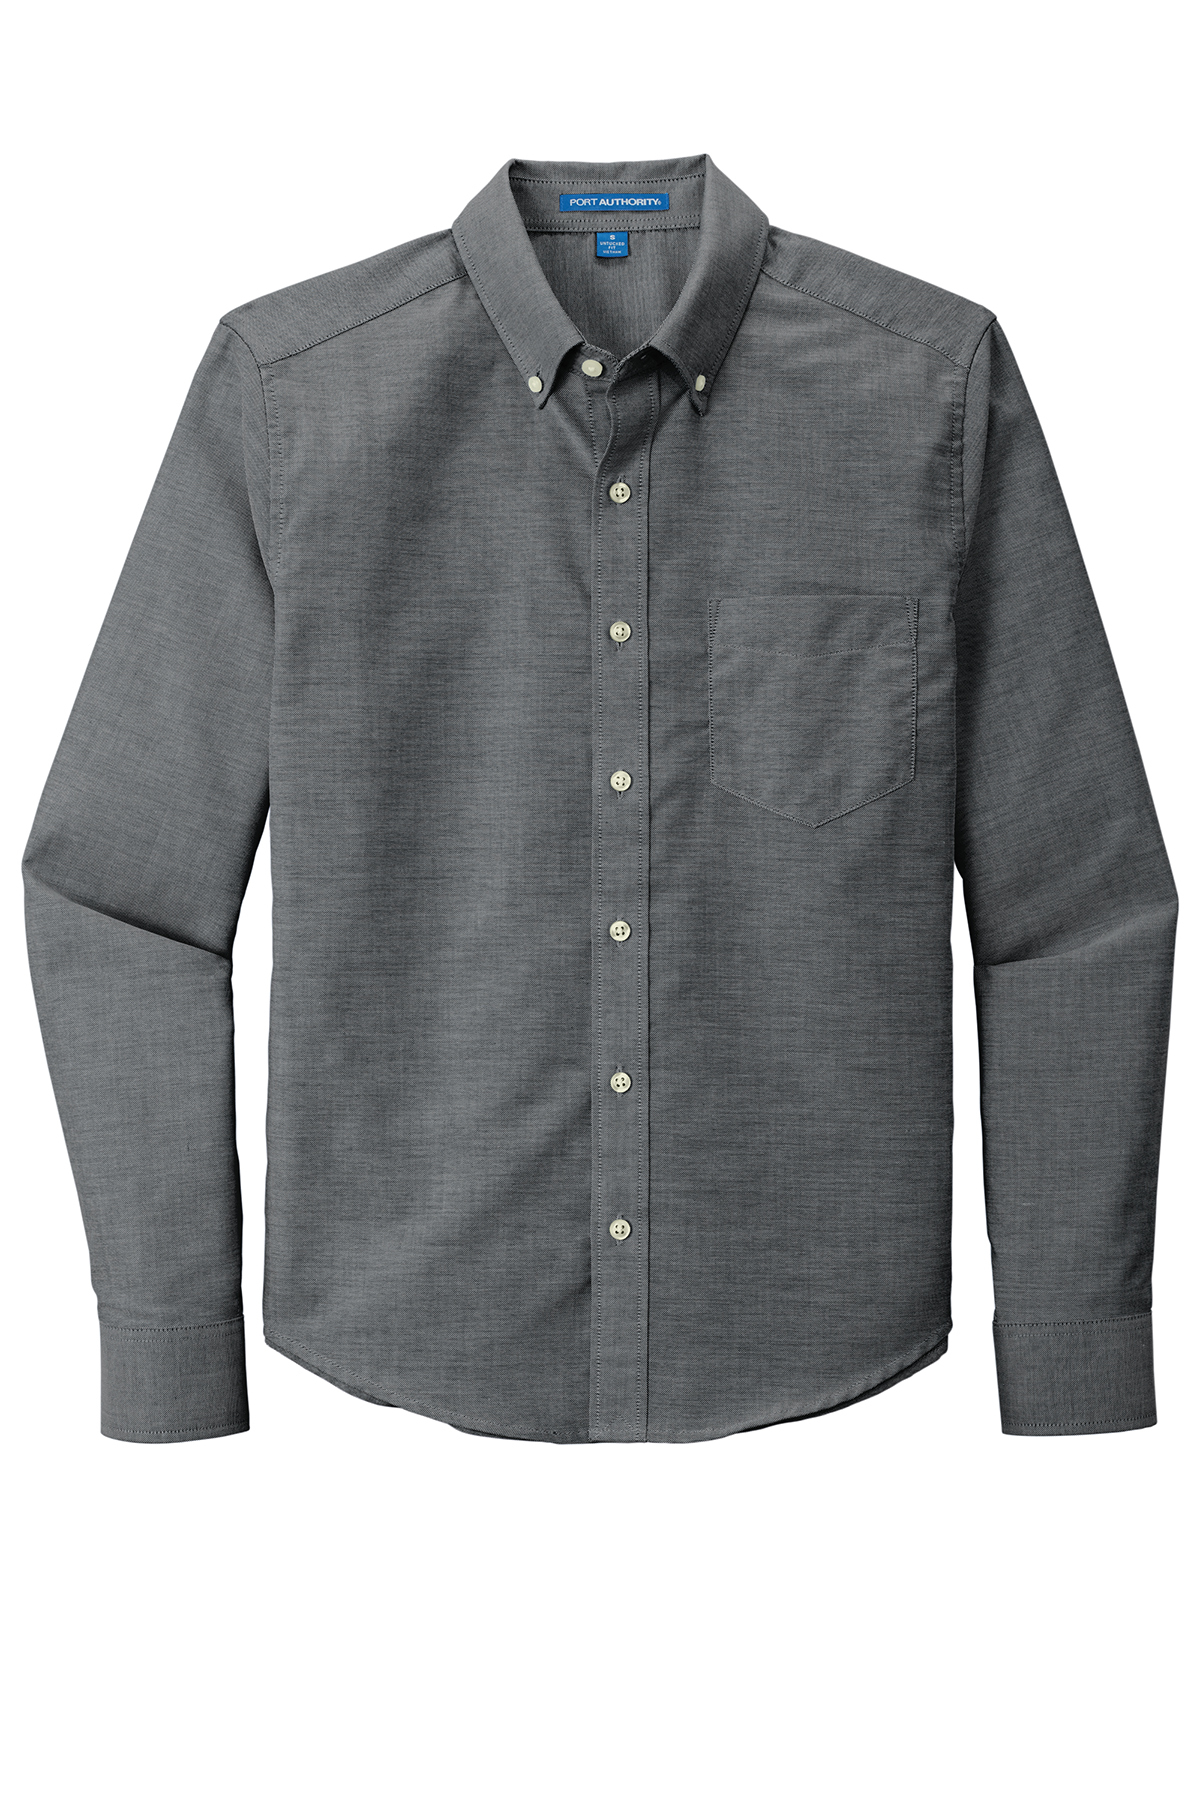 Port Authority Untucked Fit SuperPro Oxford Shirt | Product | Port ...